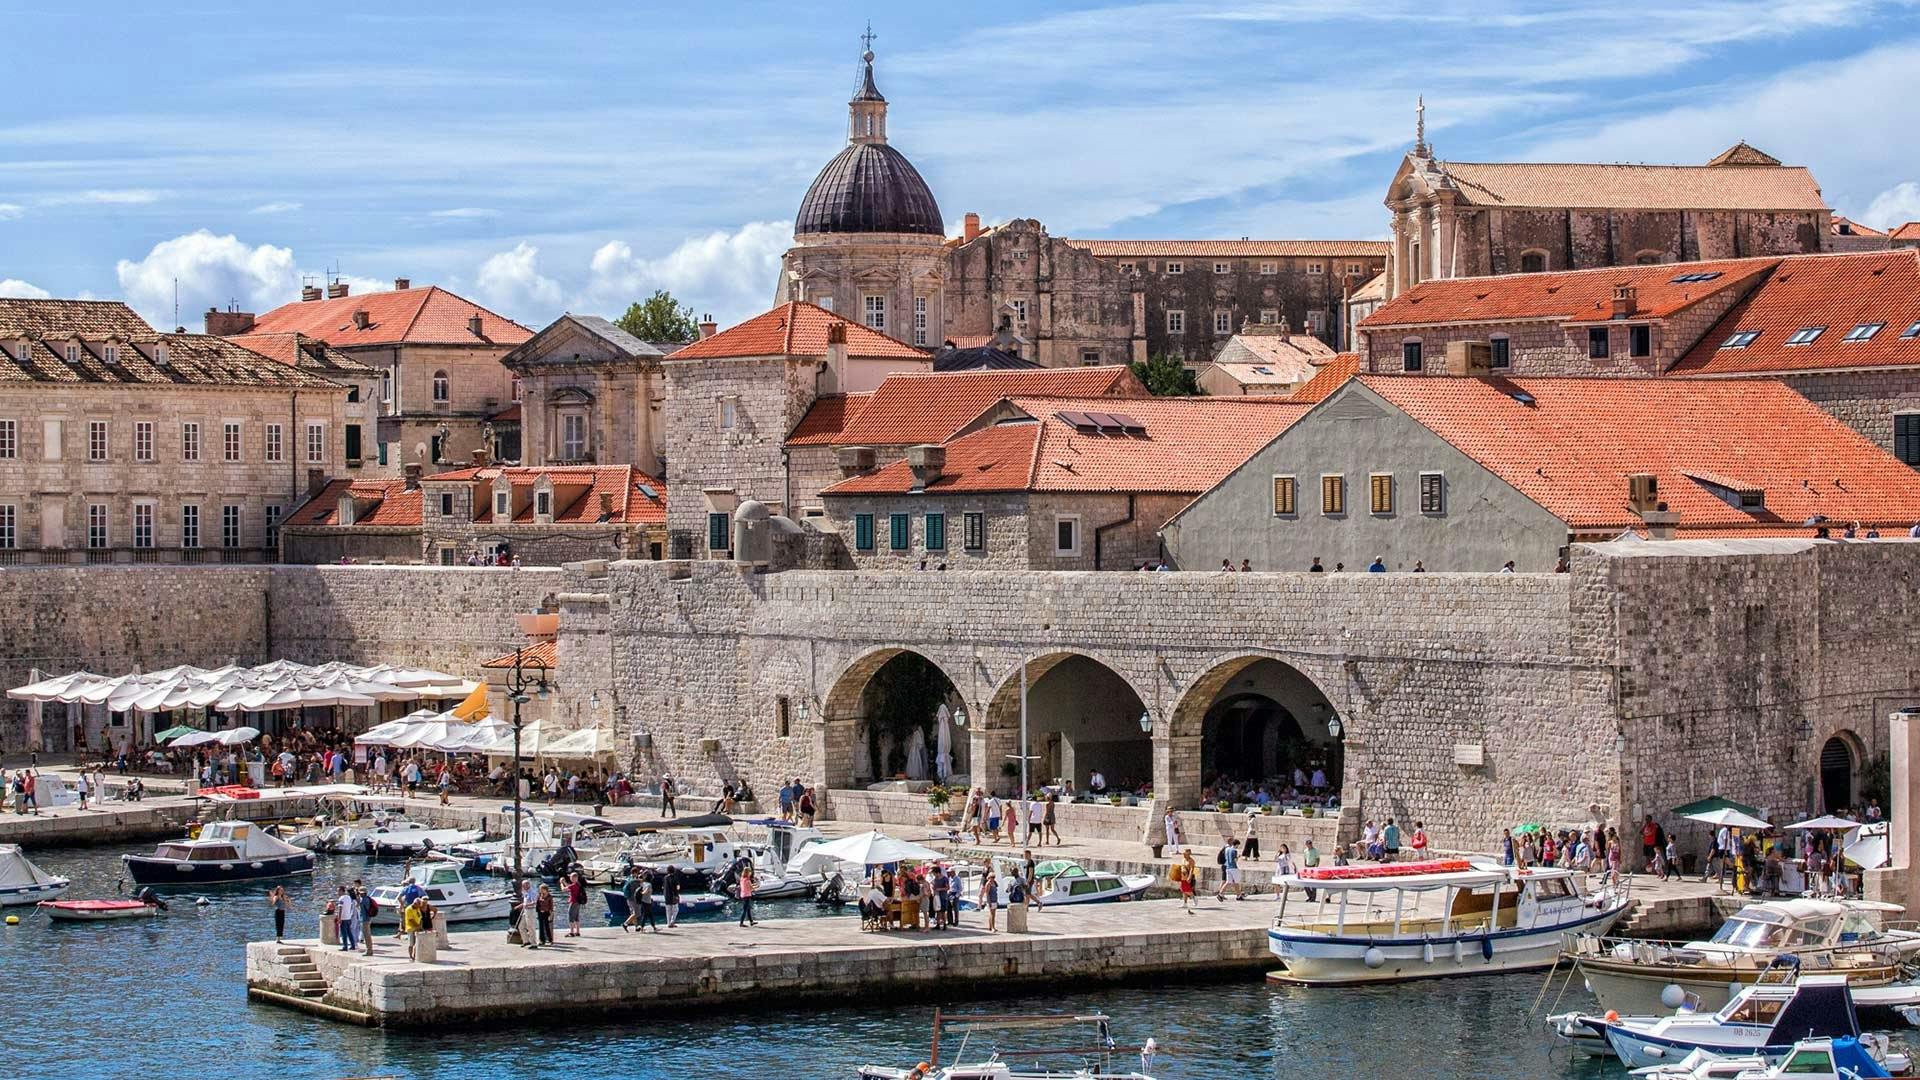 Game of Thrones and history private tour in Dubrovnik